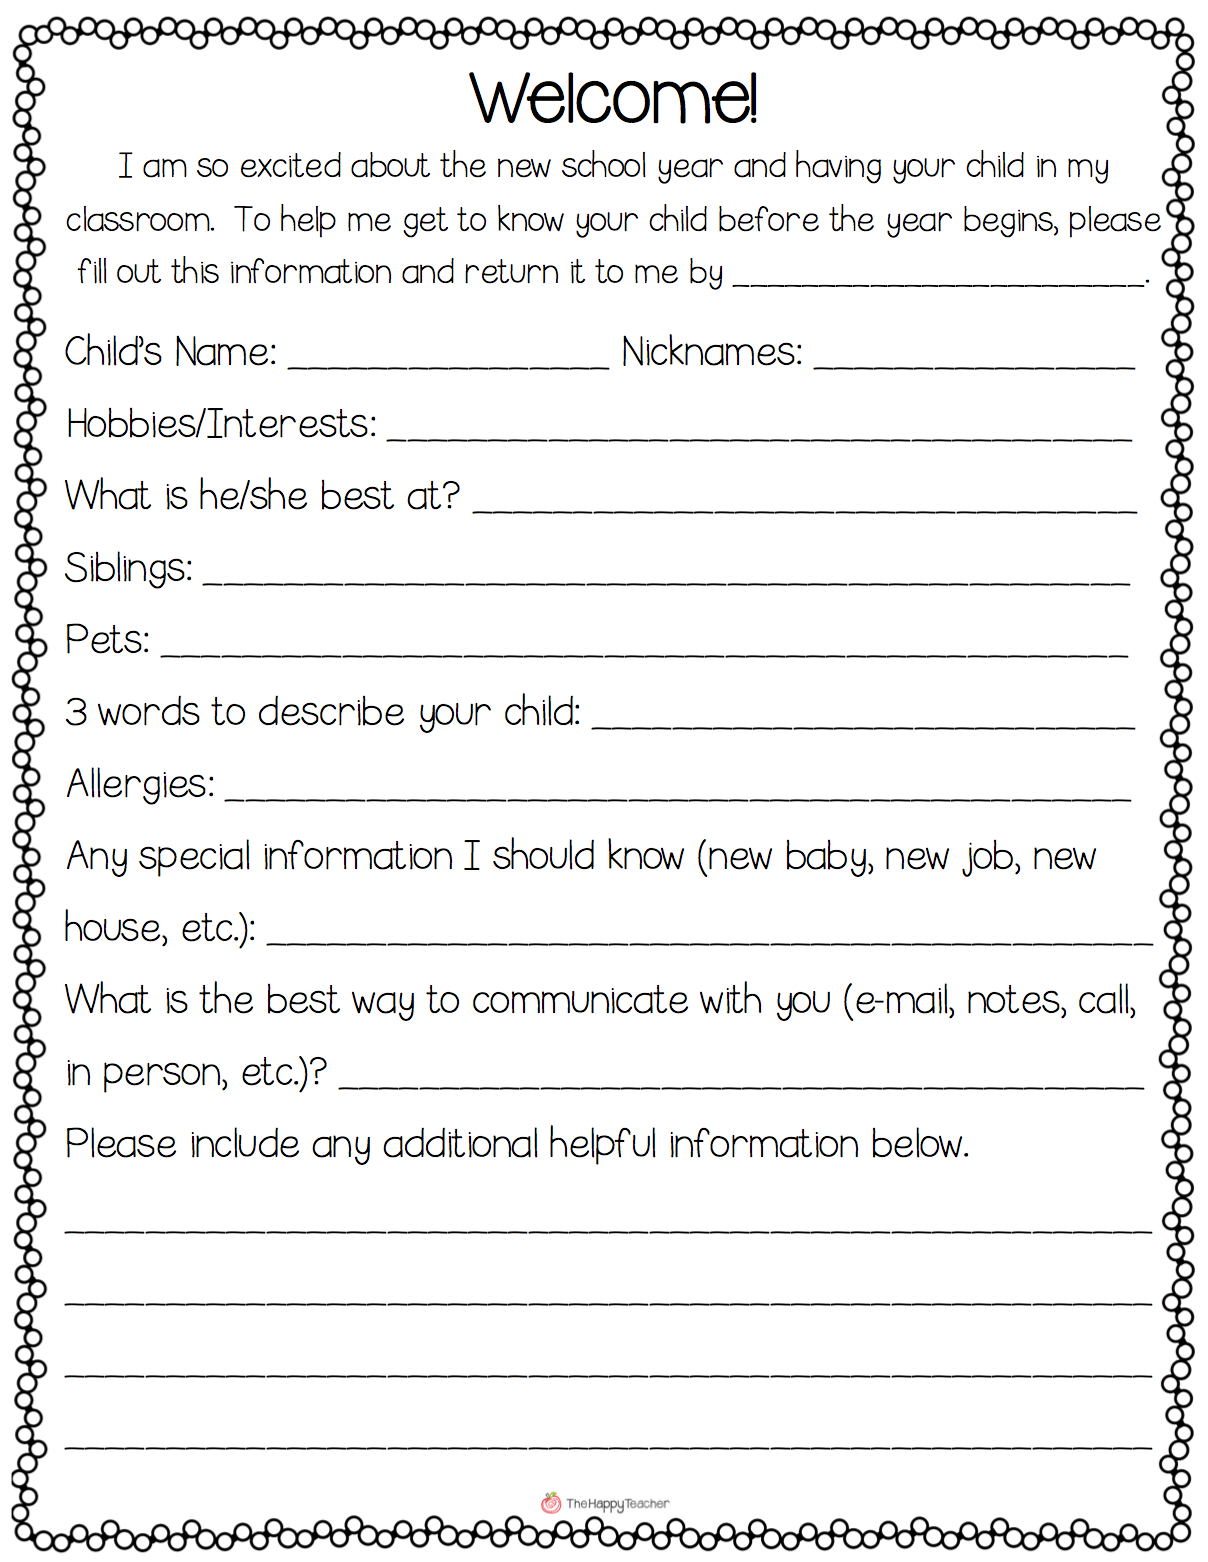 Preschool Welcome Letter to Parents From Teacher Template - Open A Positive Line Of Munication with Parents From Day 1